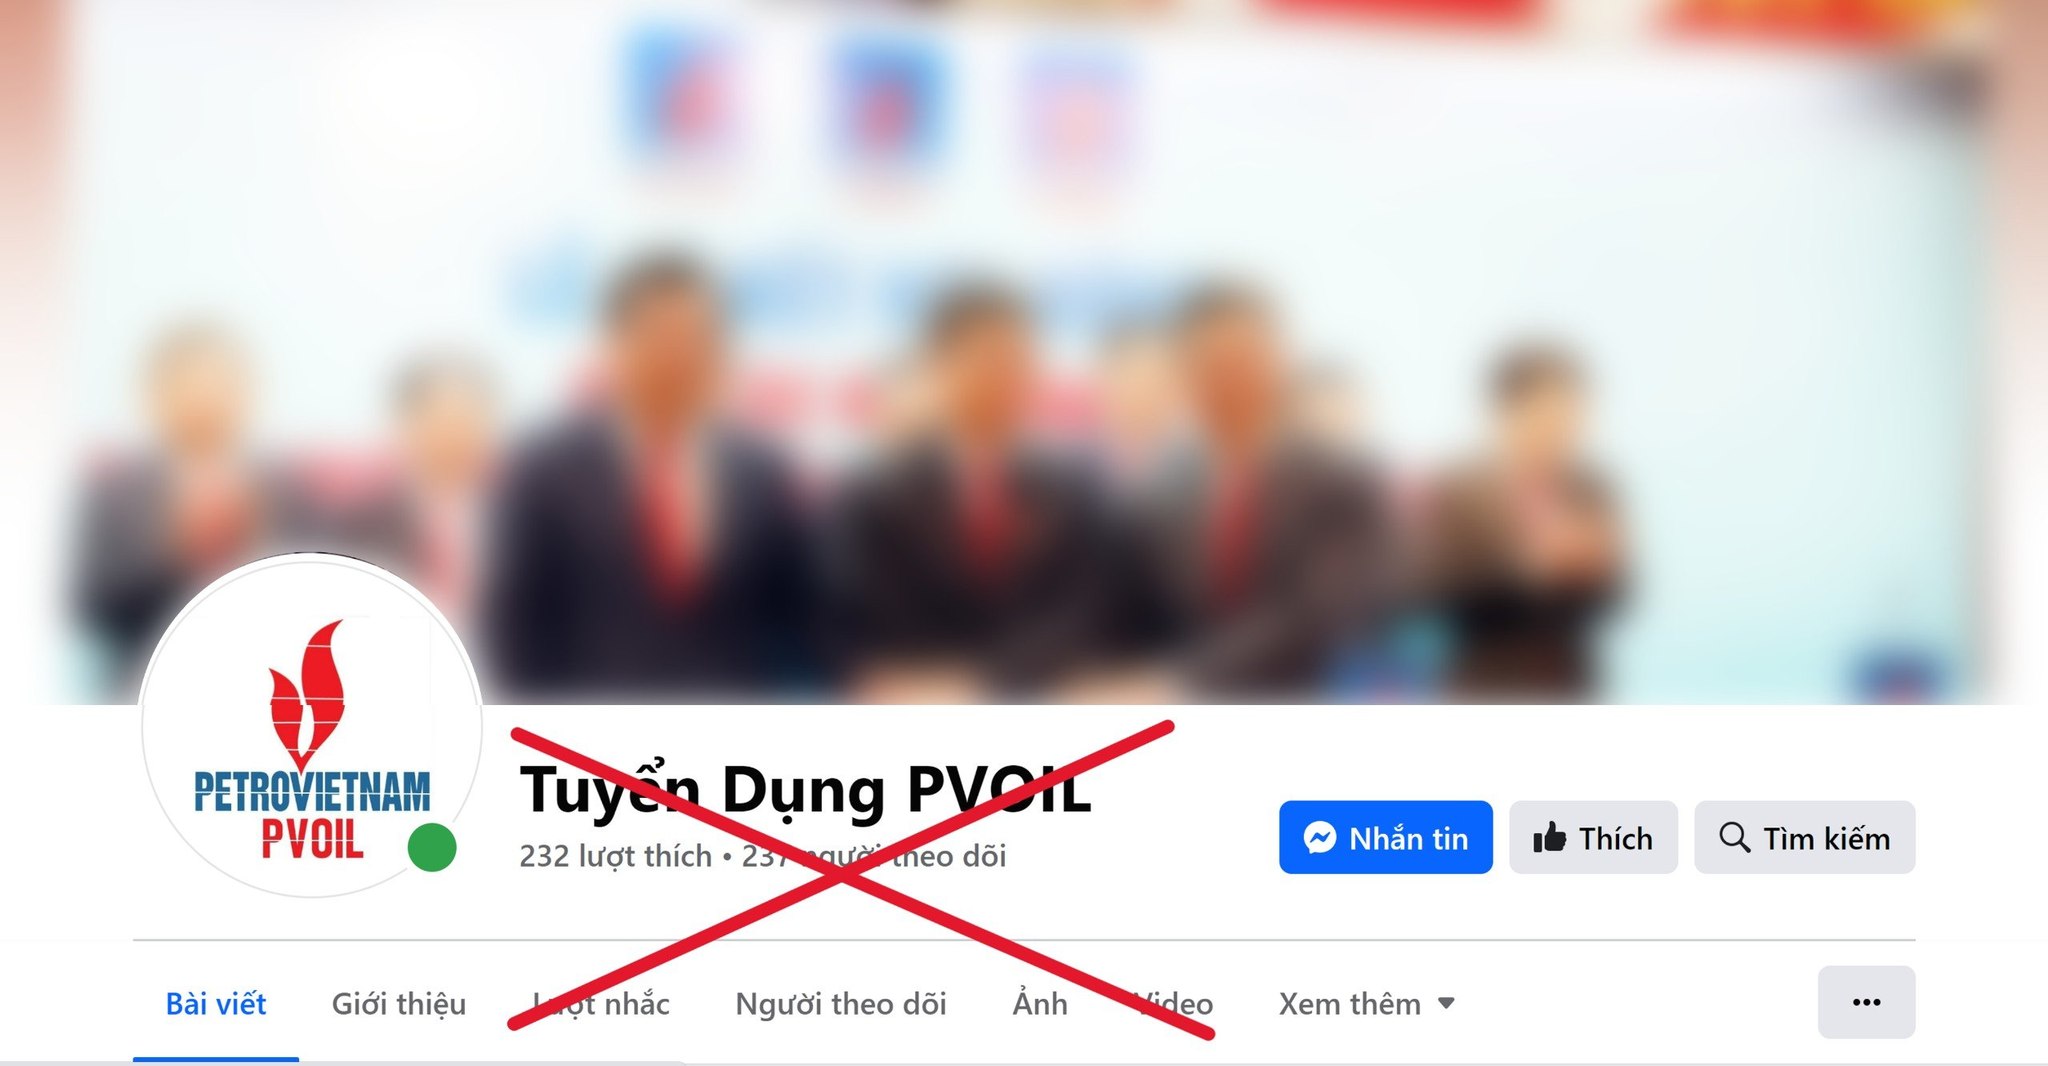 Warning about PVOIL’s fake Fanpages